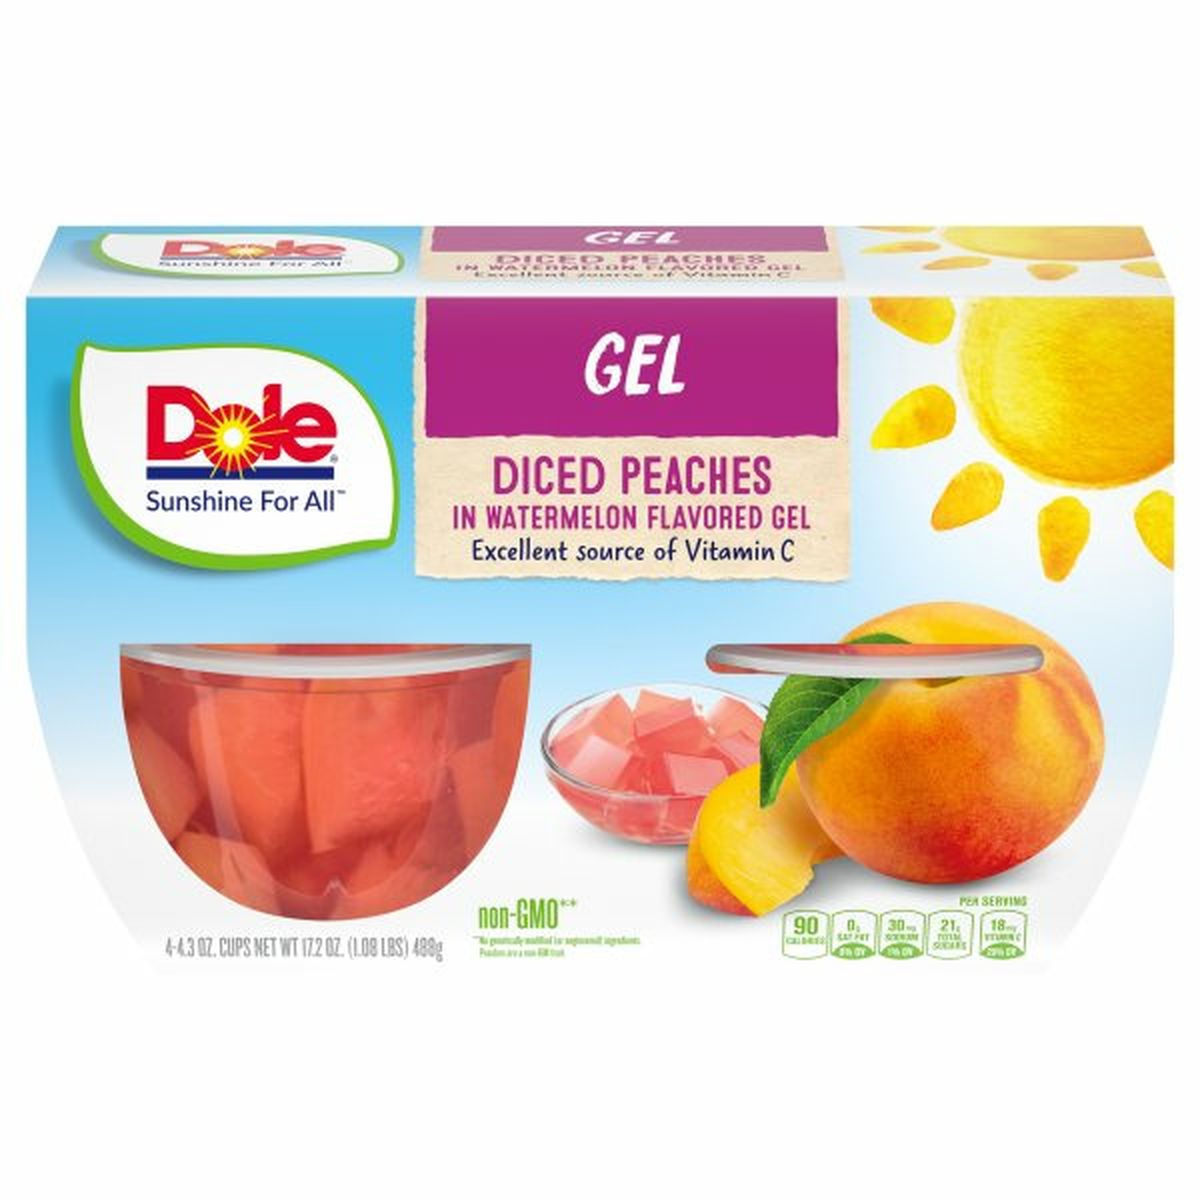 Calories in Dole Diced Peaches, in Watermelon Flavored Gel